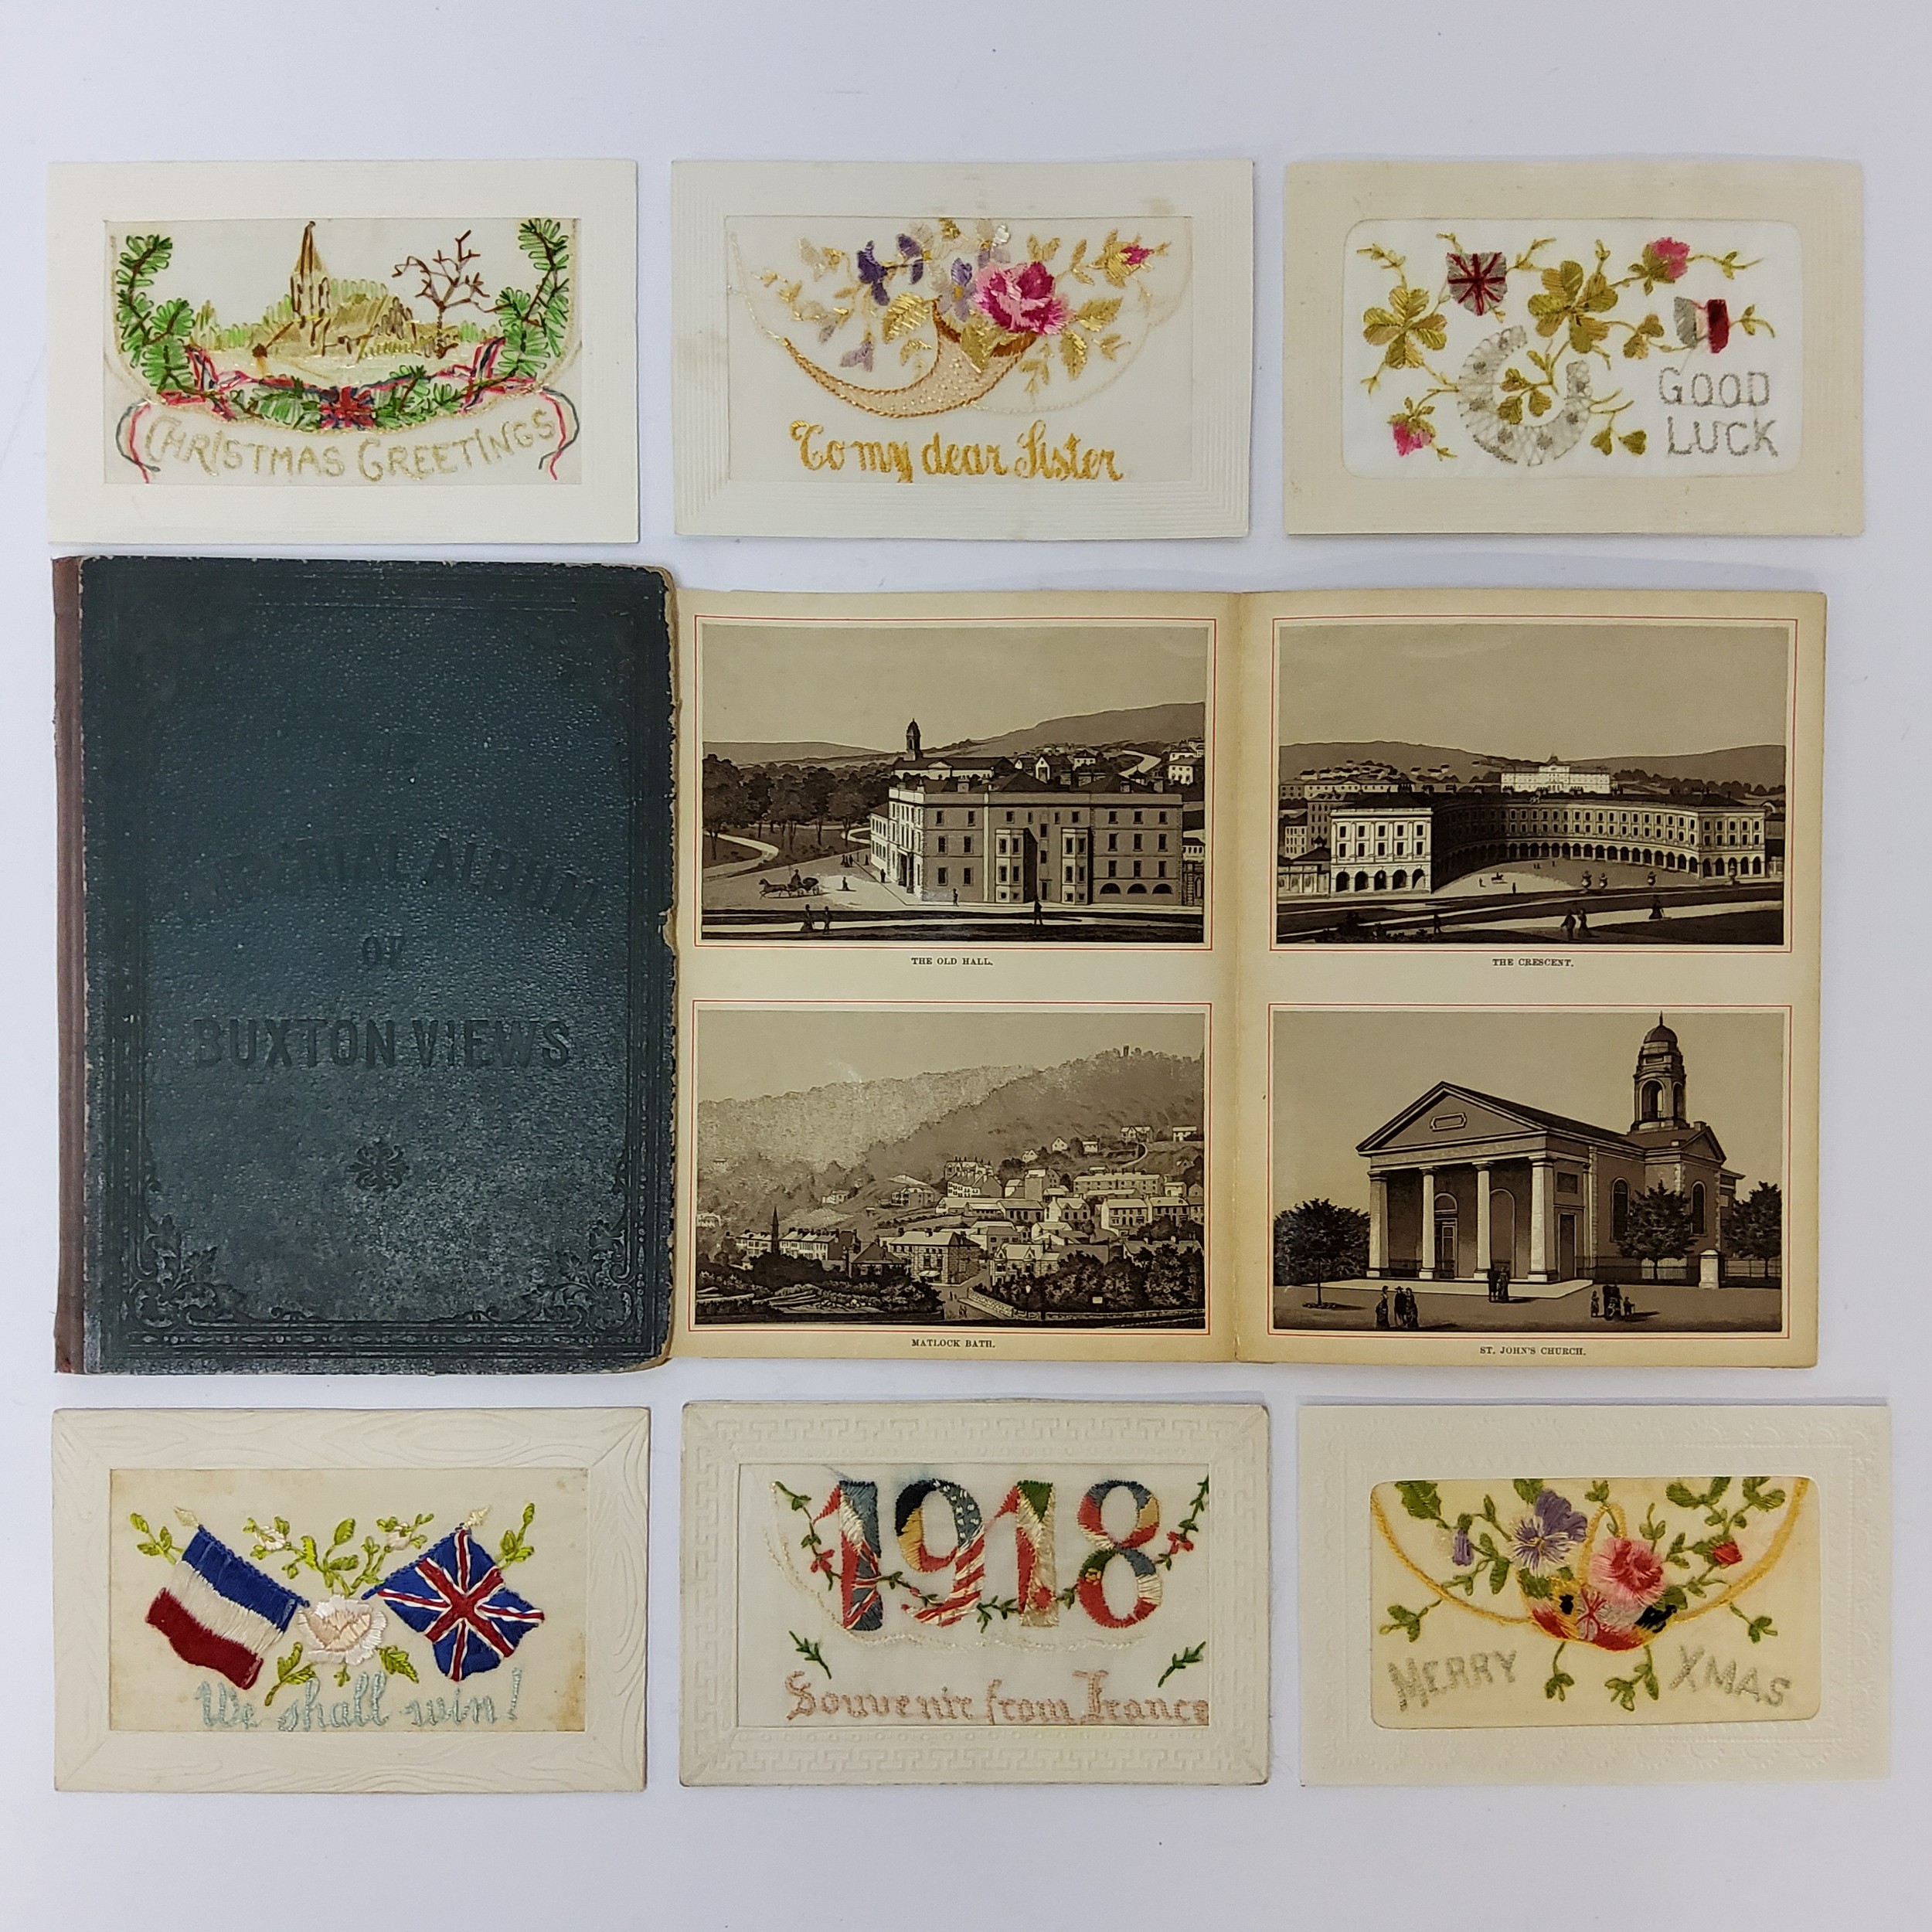 Postcards - six early 20th century embroidered examples including a WWI souvenir from France 1918;